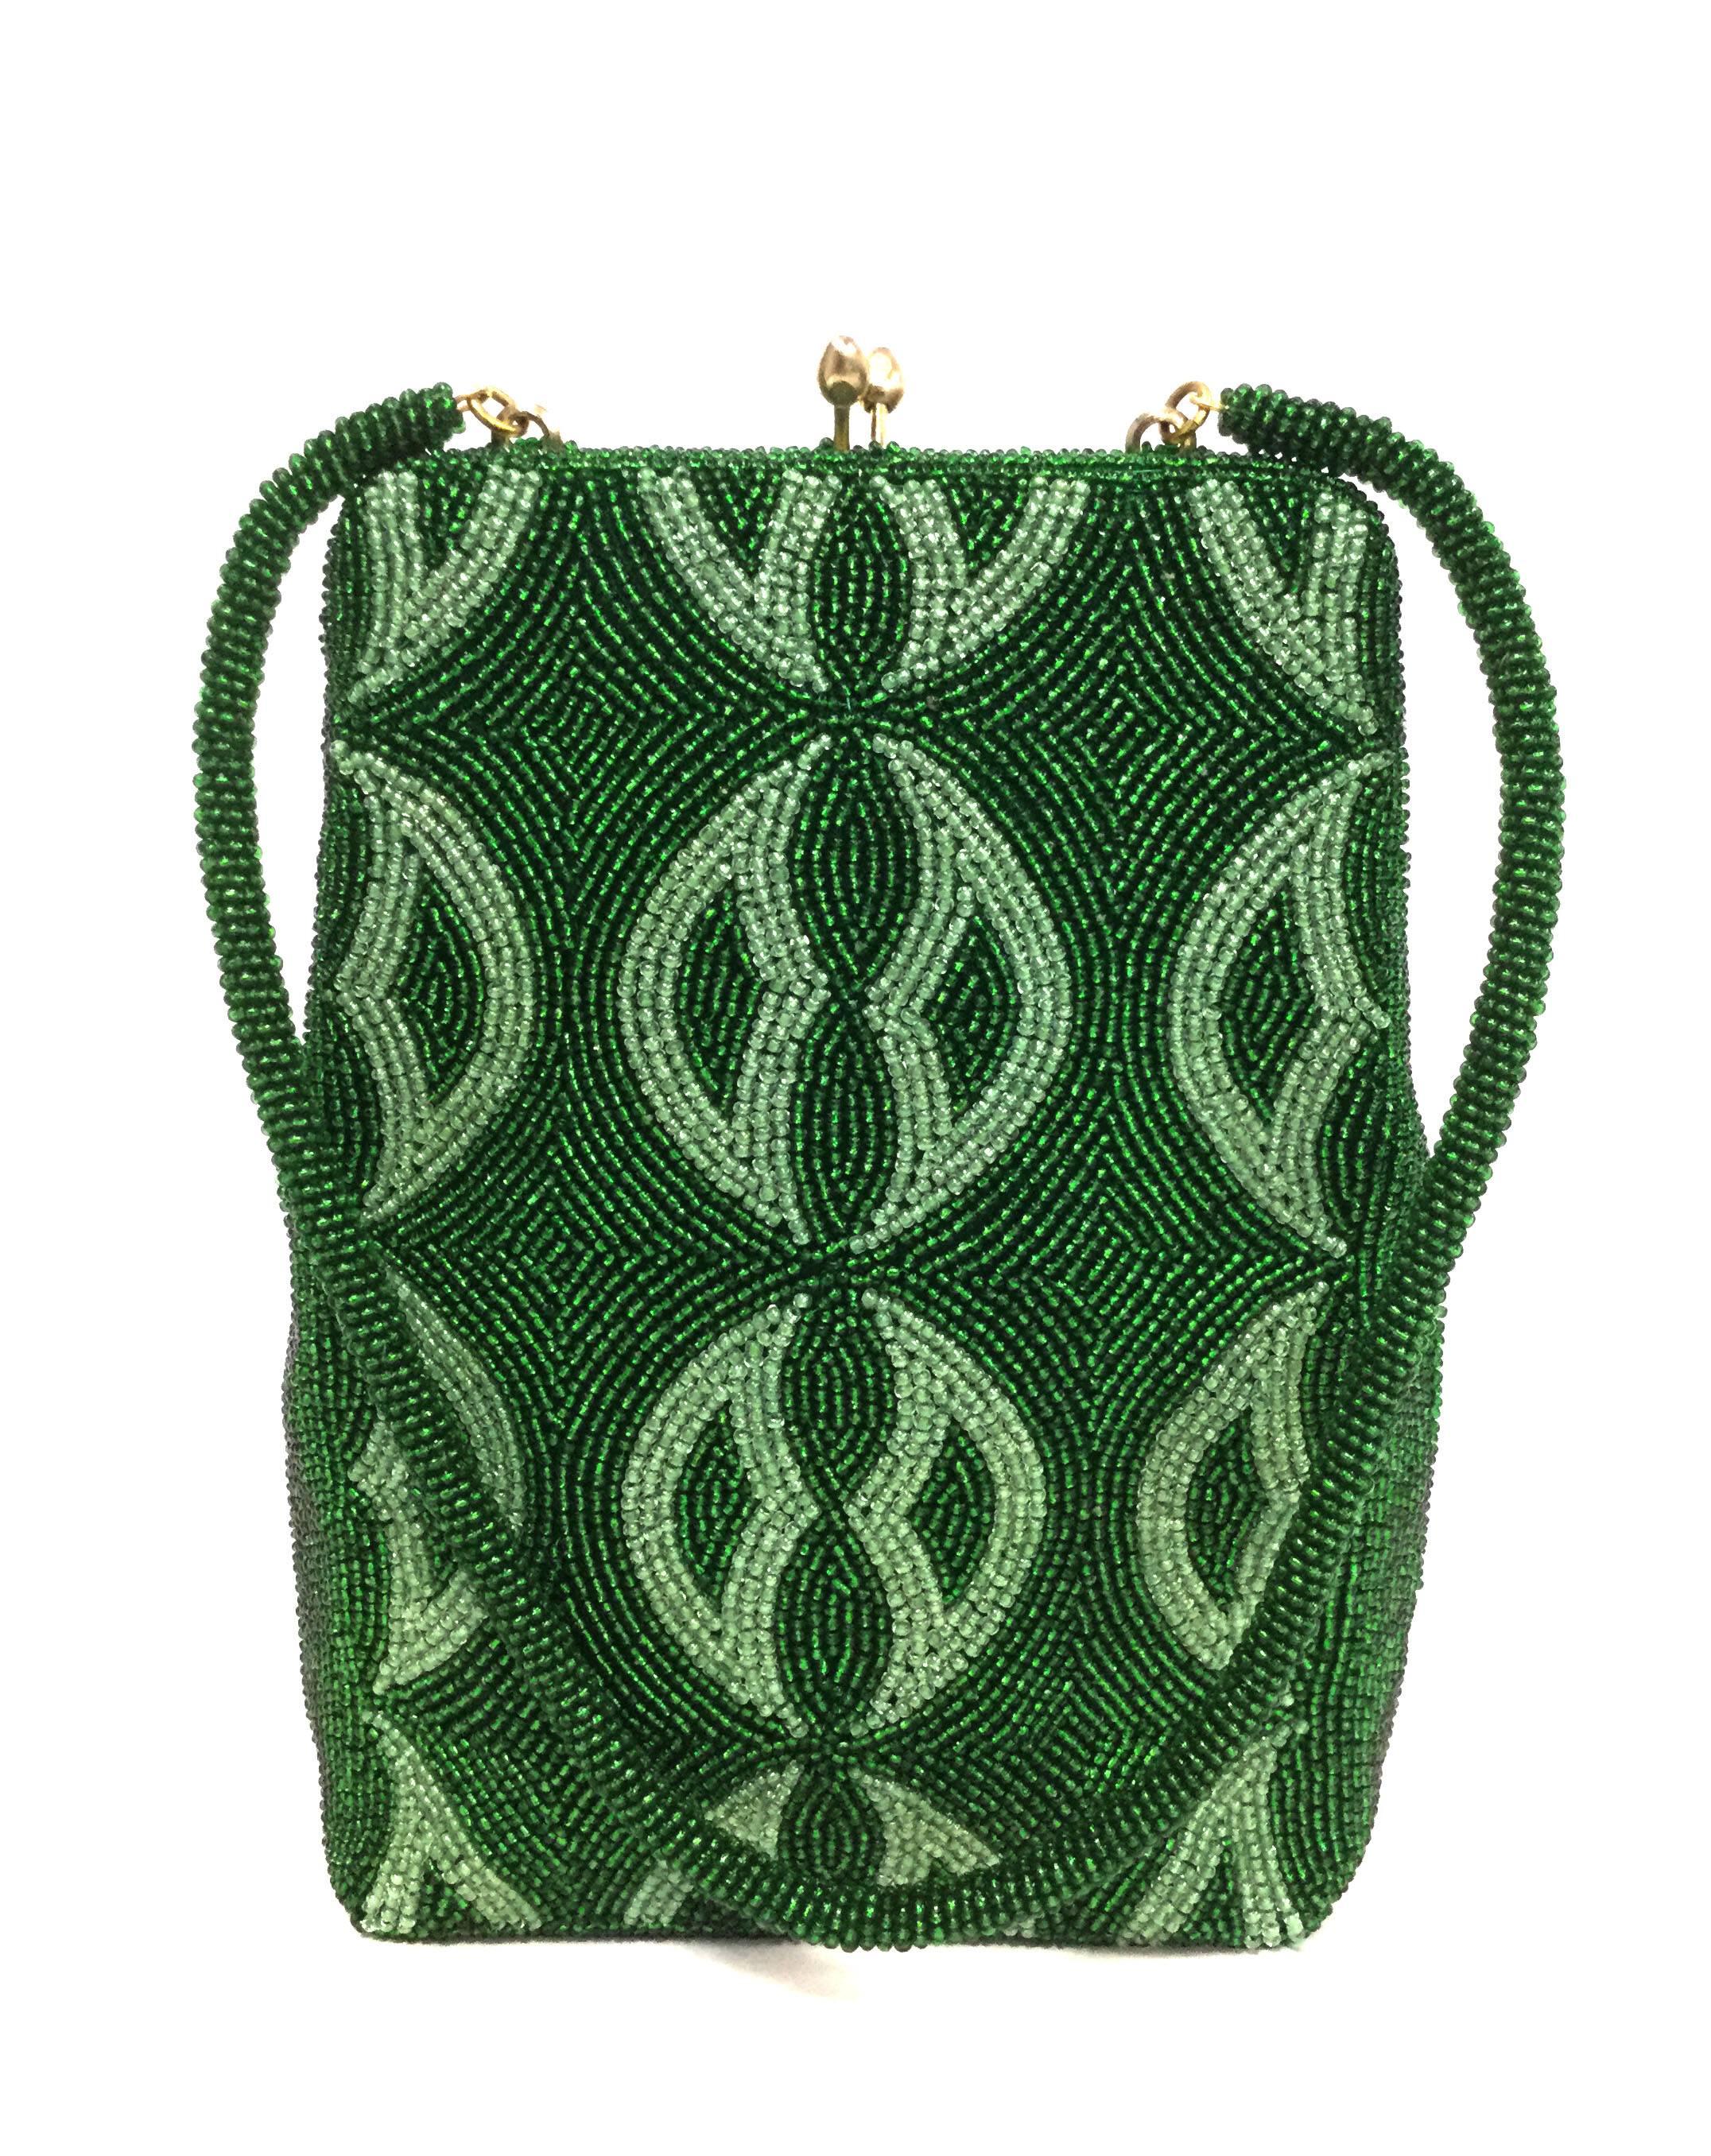 This gorgeous, shimmering mid century evening purse fully beaded - right down to the handle! The purse features a lattice pattern with a kelly green background and a pistachio green accent beading on the front. The rest of the purse is a solid